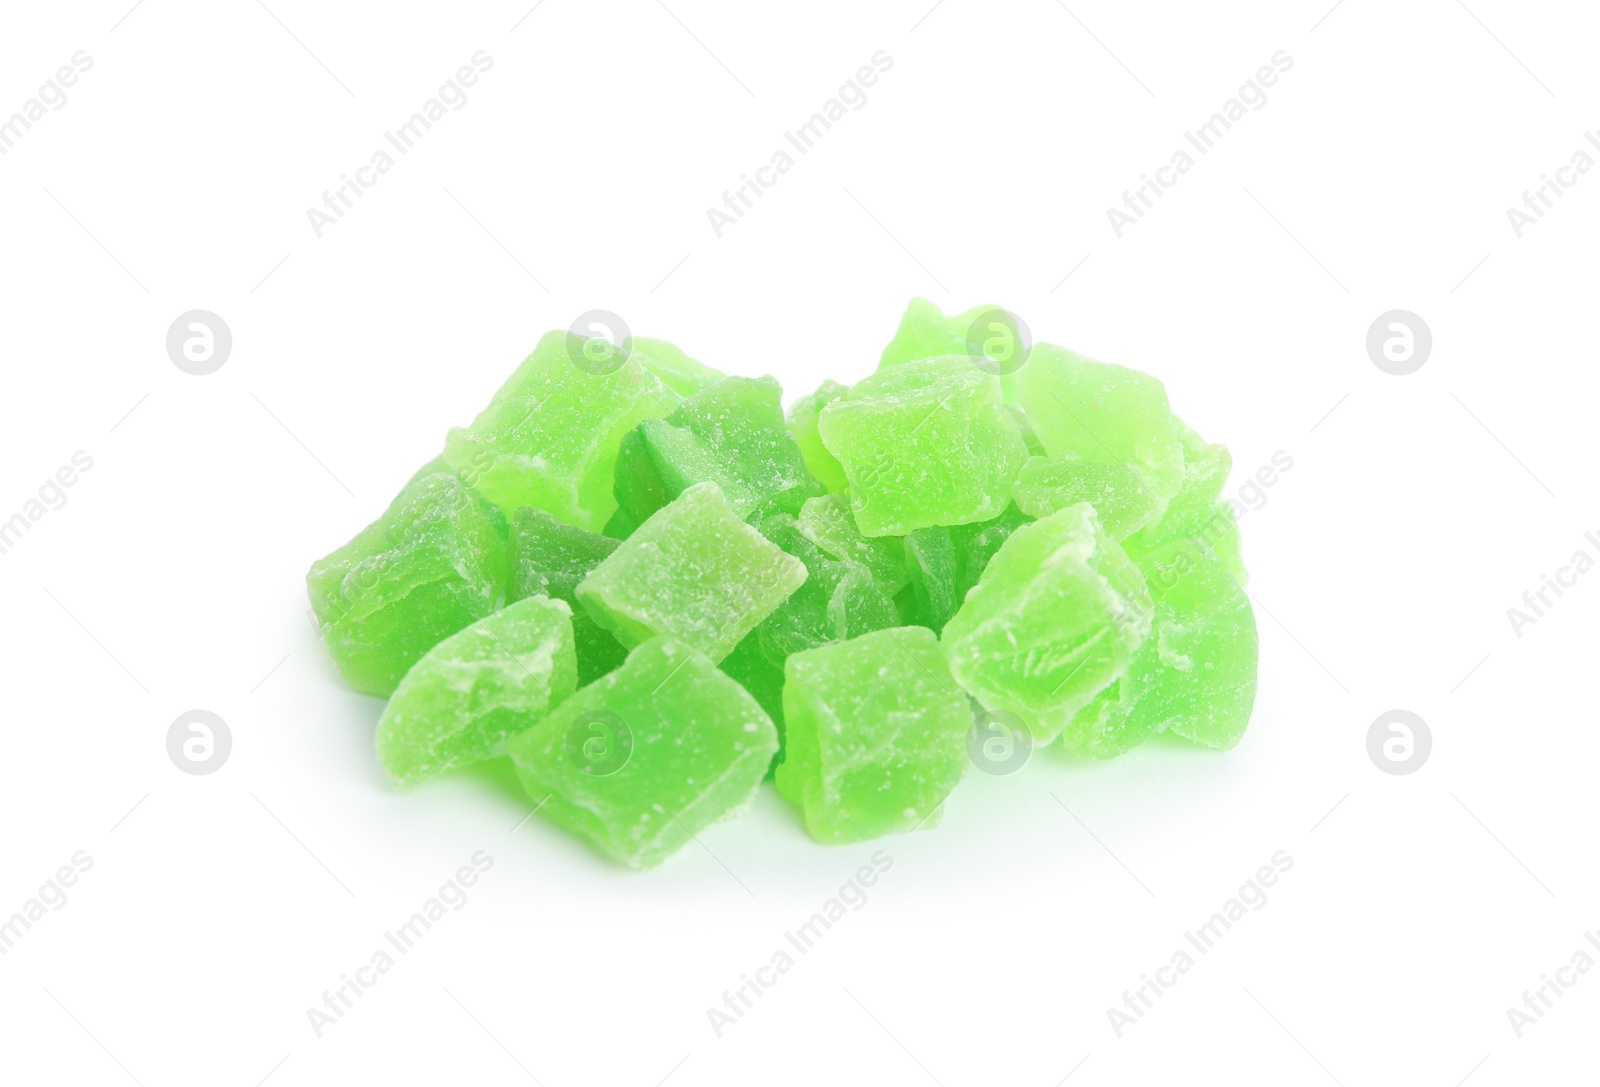 Photo of Delicious green candied fruit pieces on white background